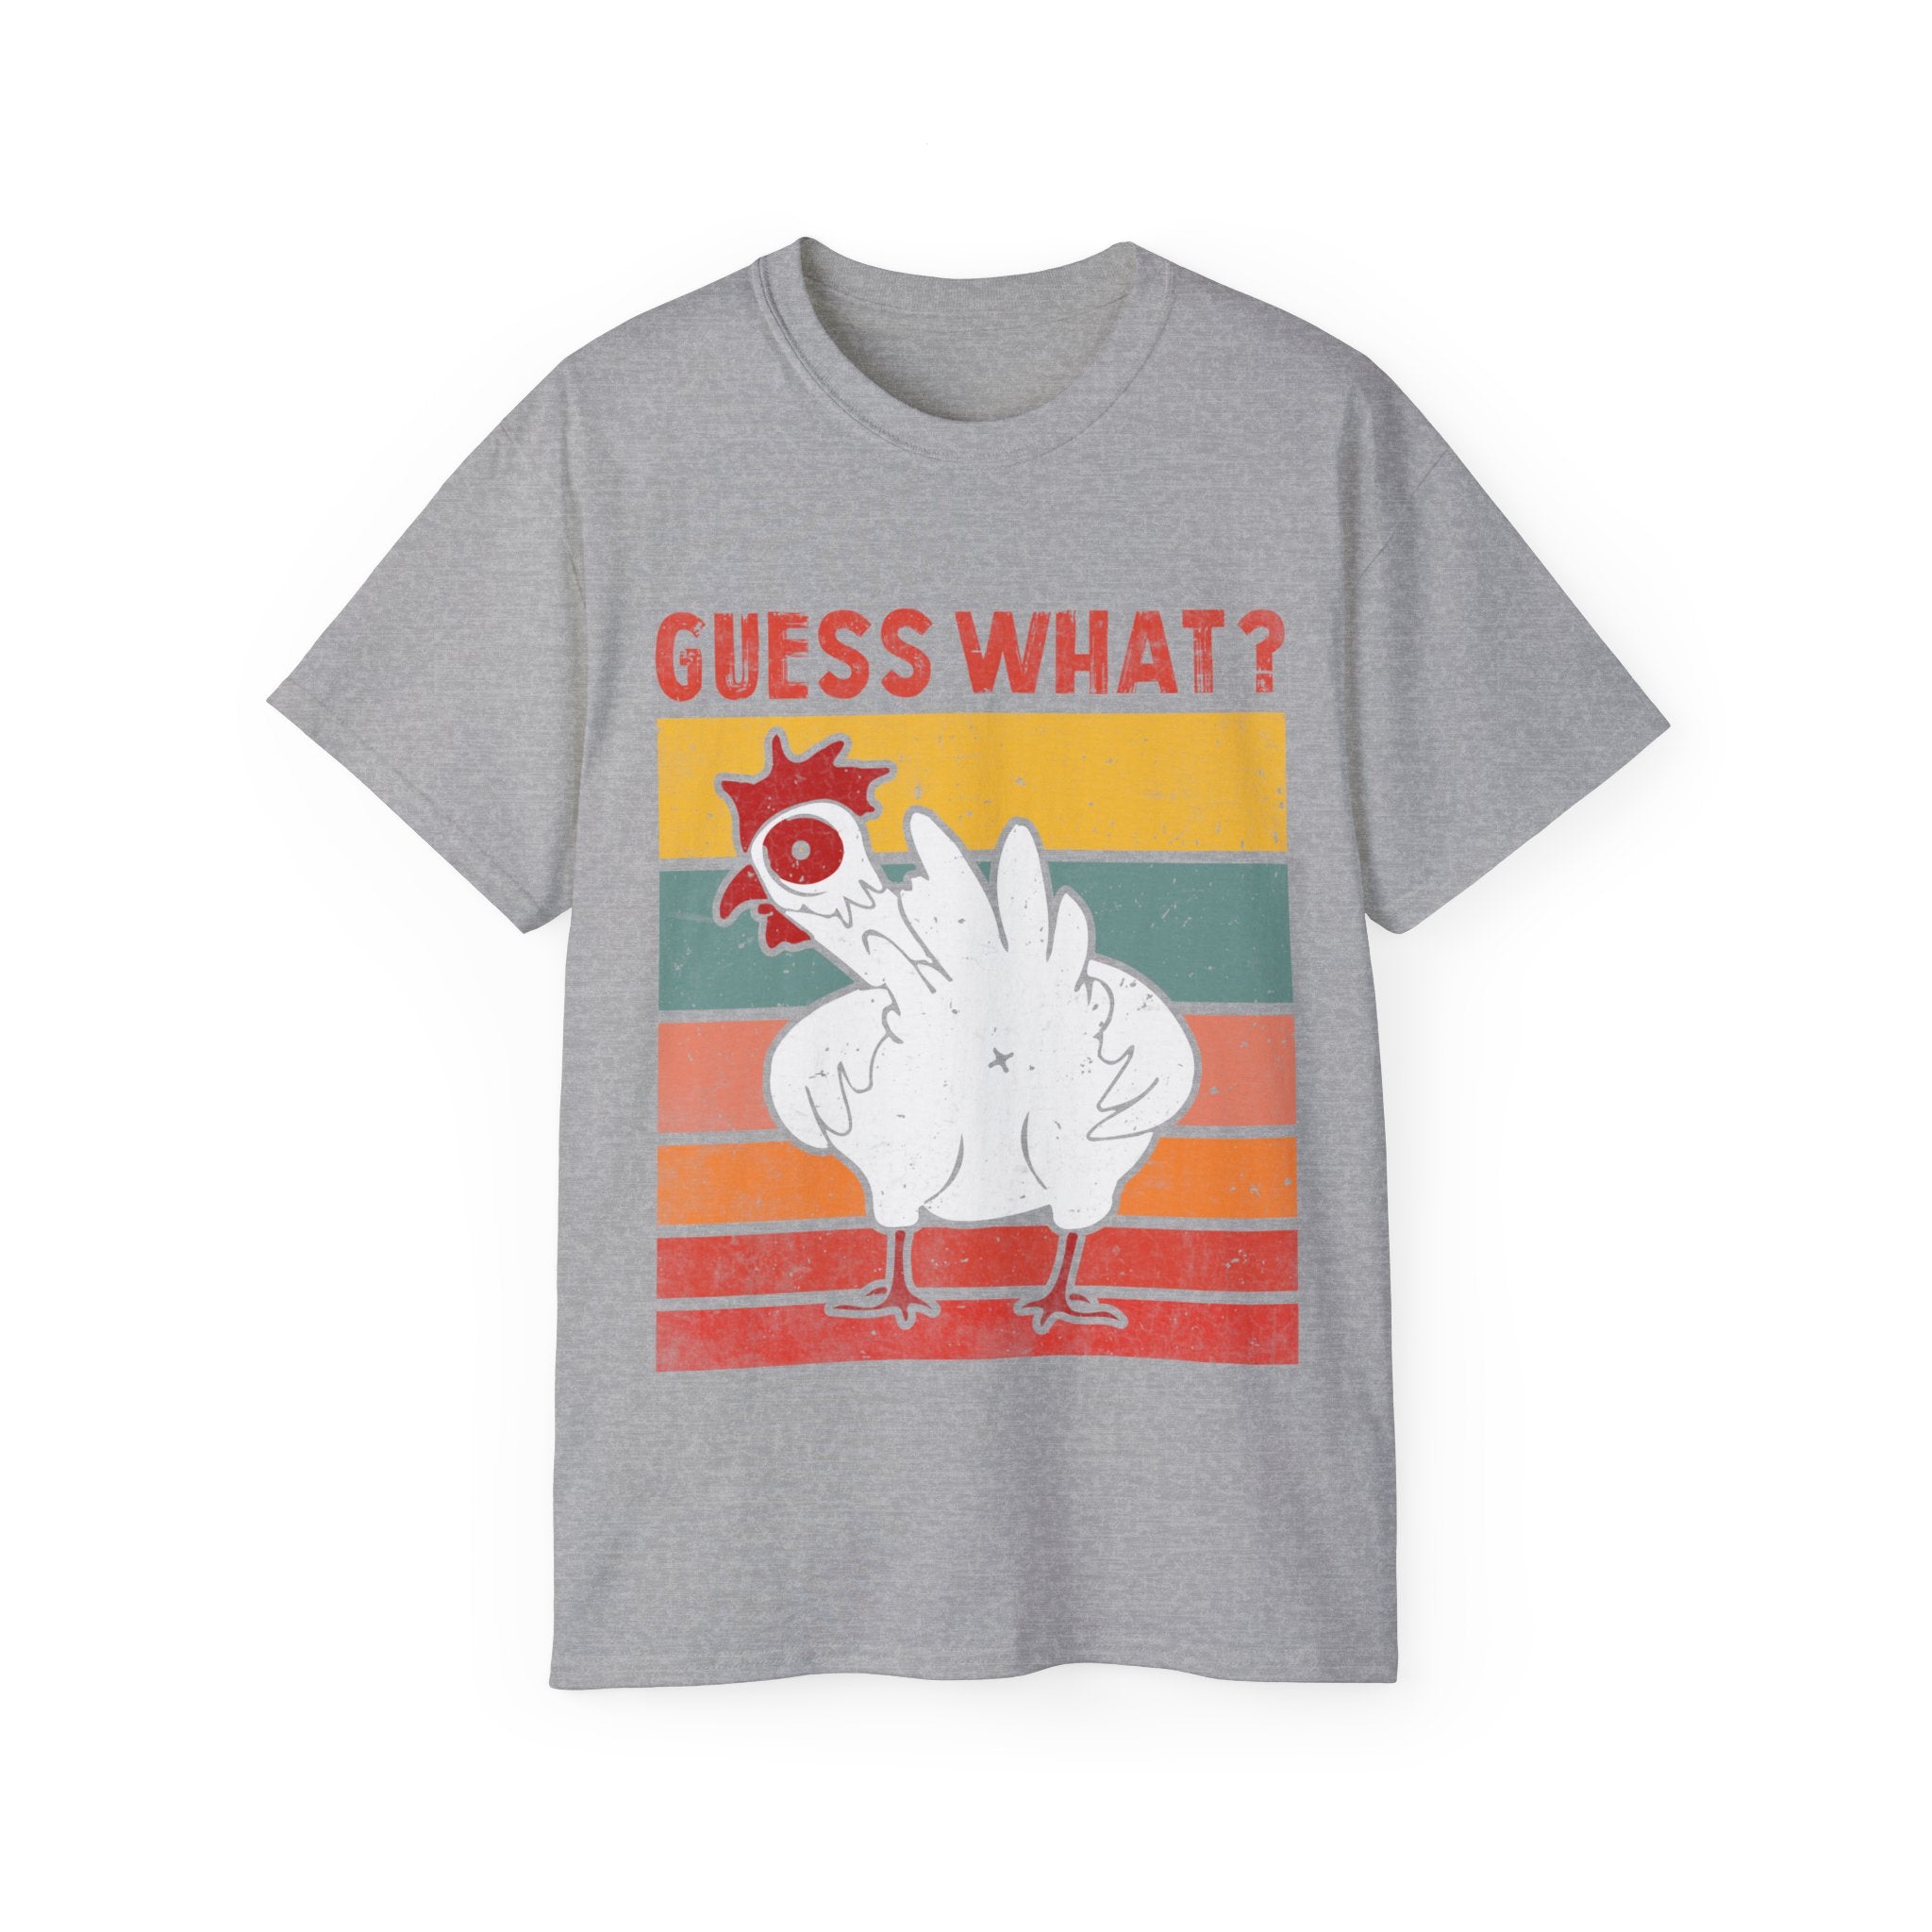 "Guess What? Chicken Butt." Unisex Ultra Cotton Tee - Classic Humor Meets Comfortable Style perfect way to lighten the mood at casual gatherings, family events, or any day you feel like spreading cheer